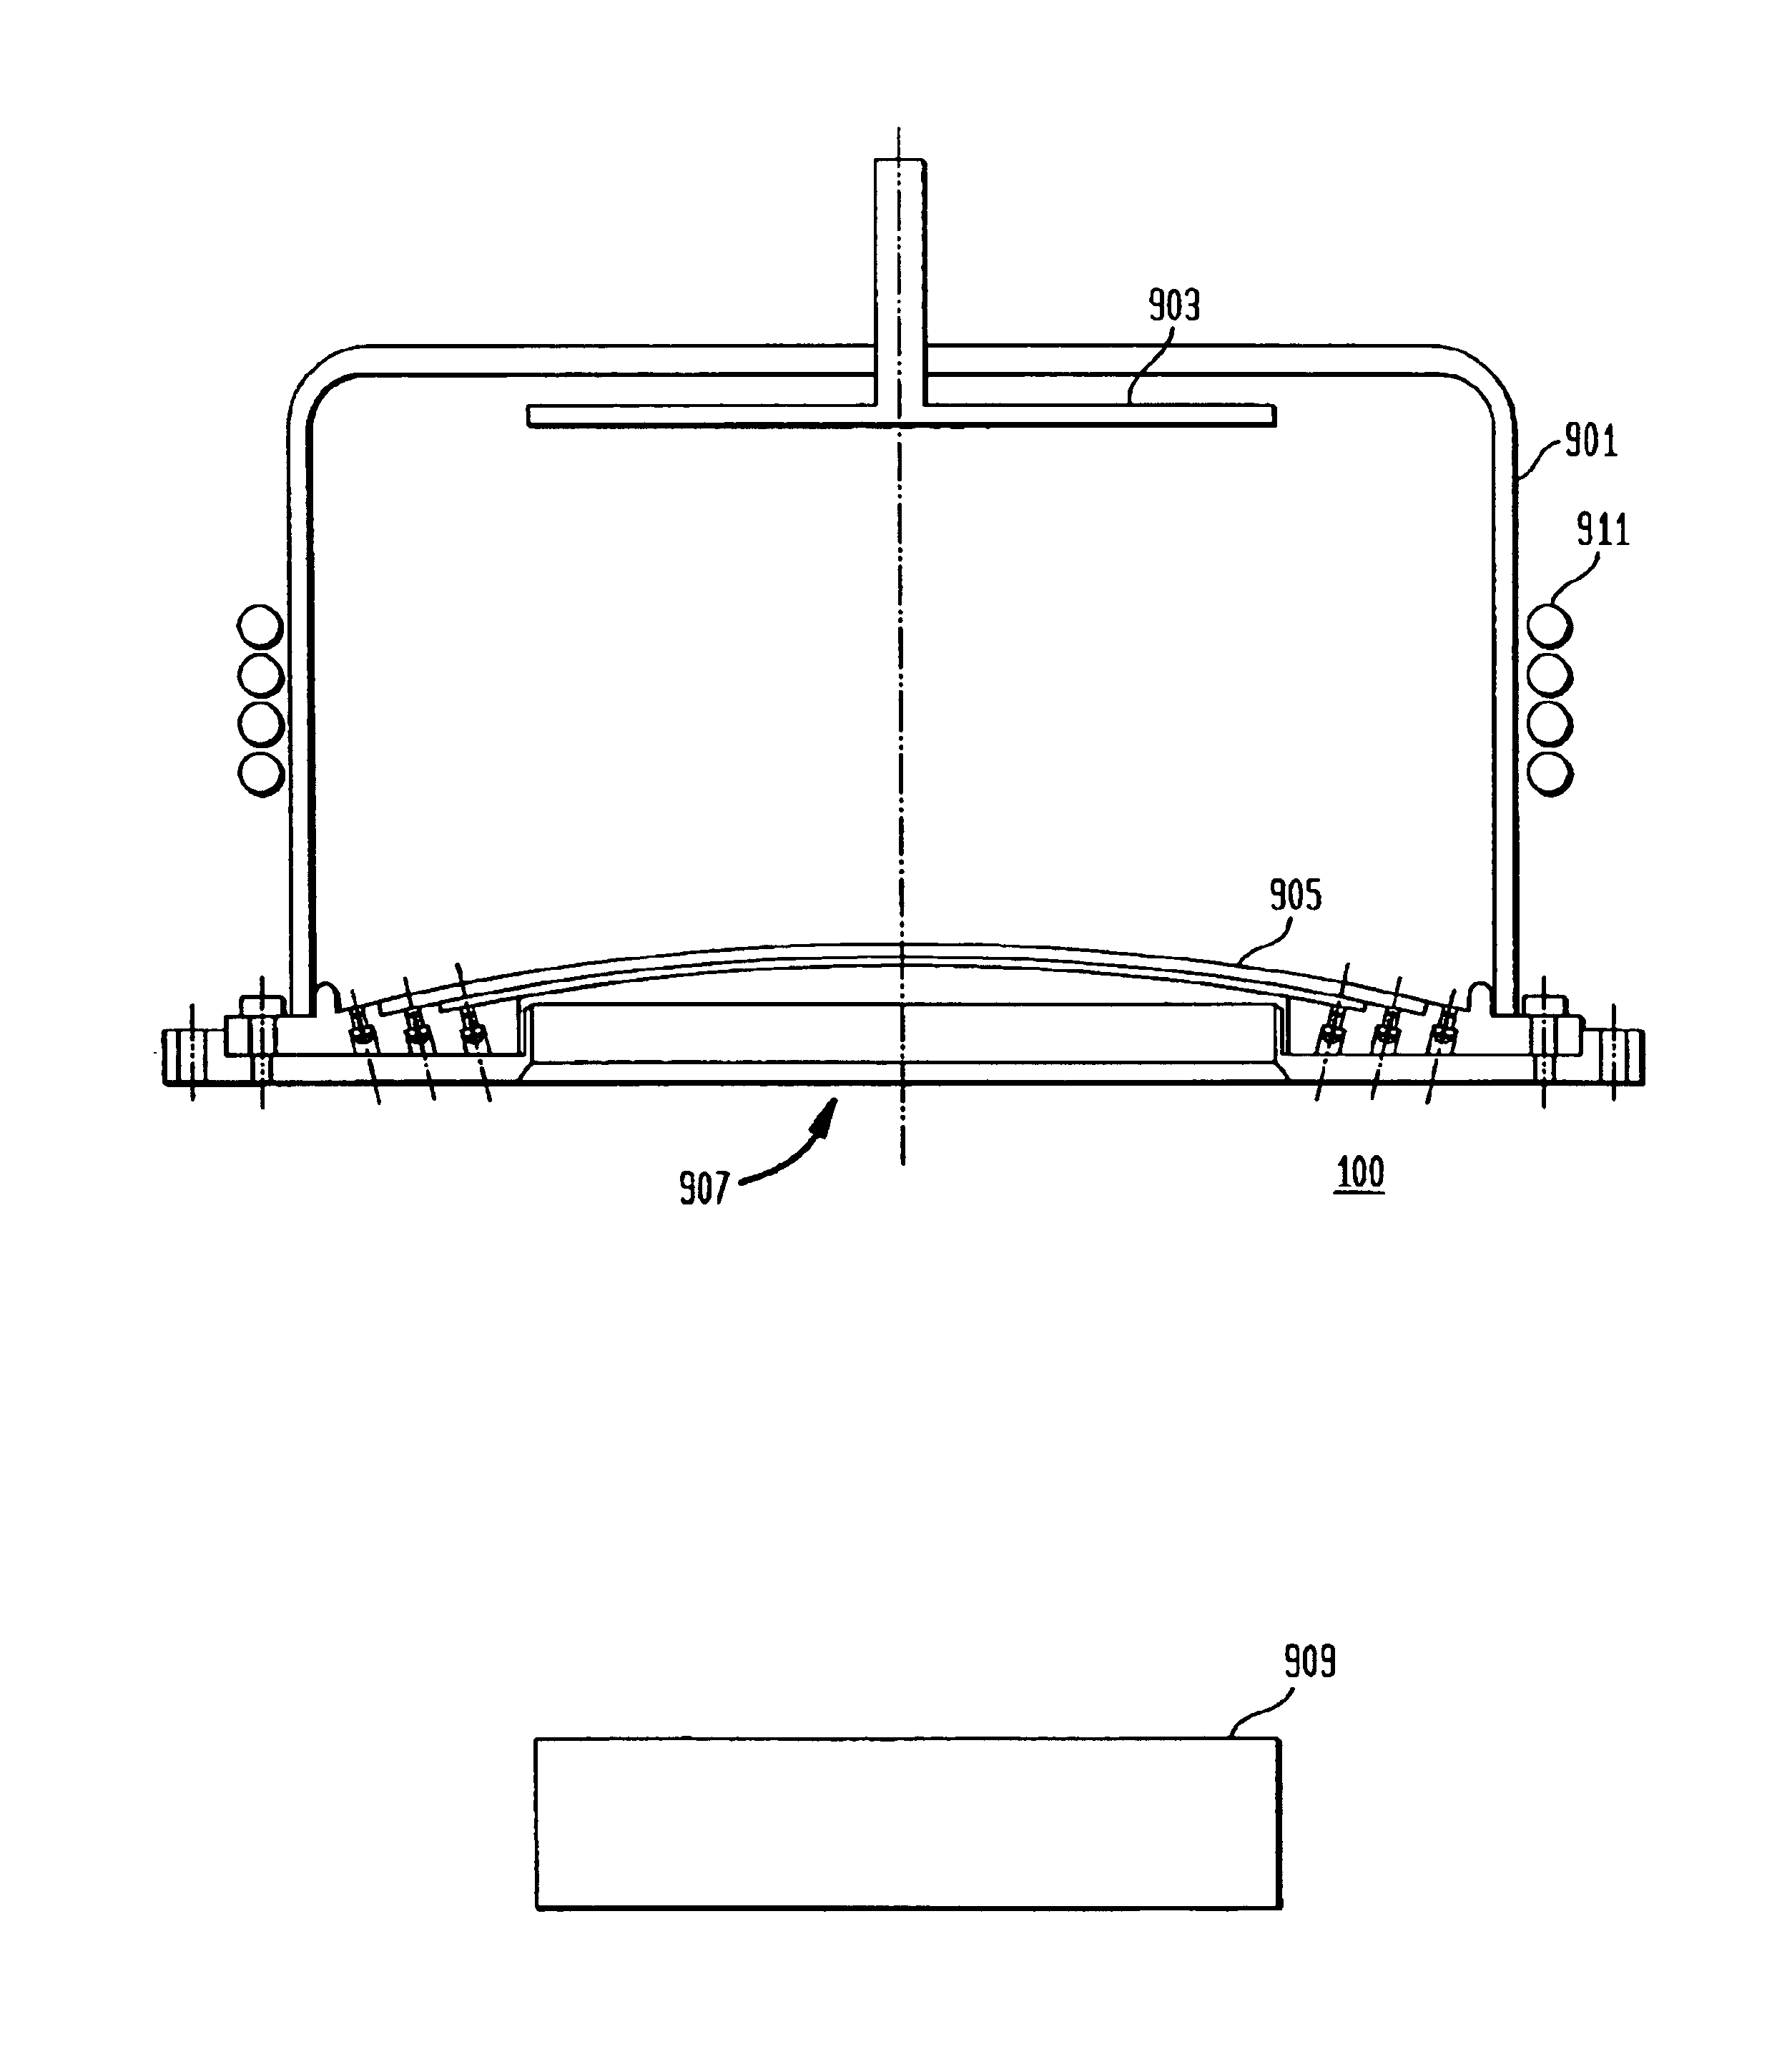 Charged particle beam extraction and formation apparatus